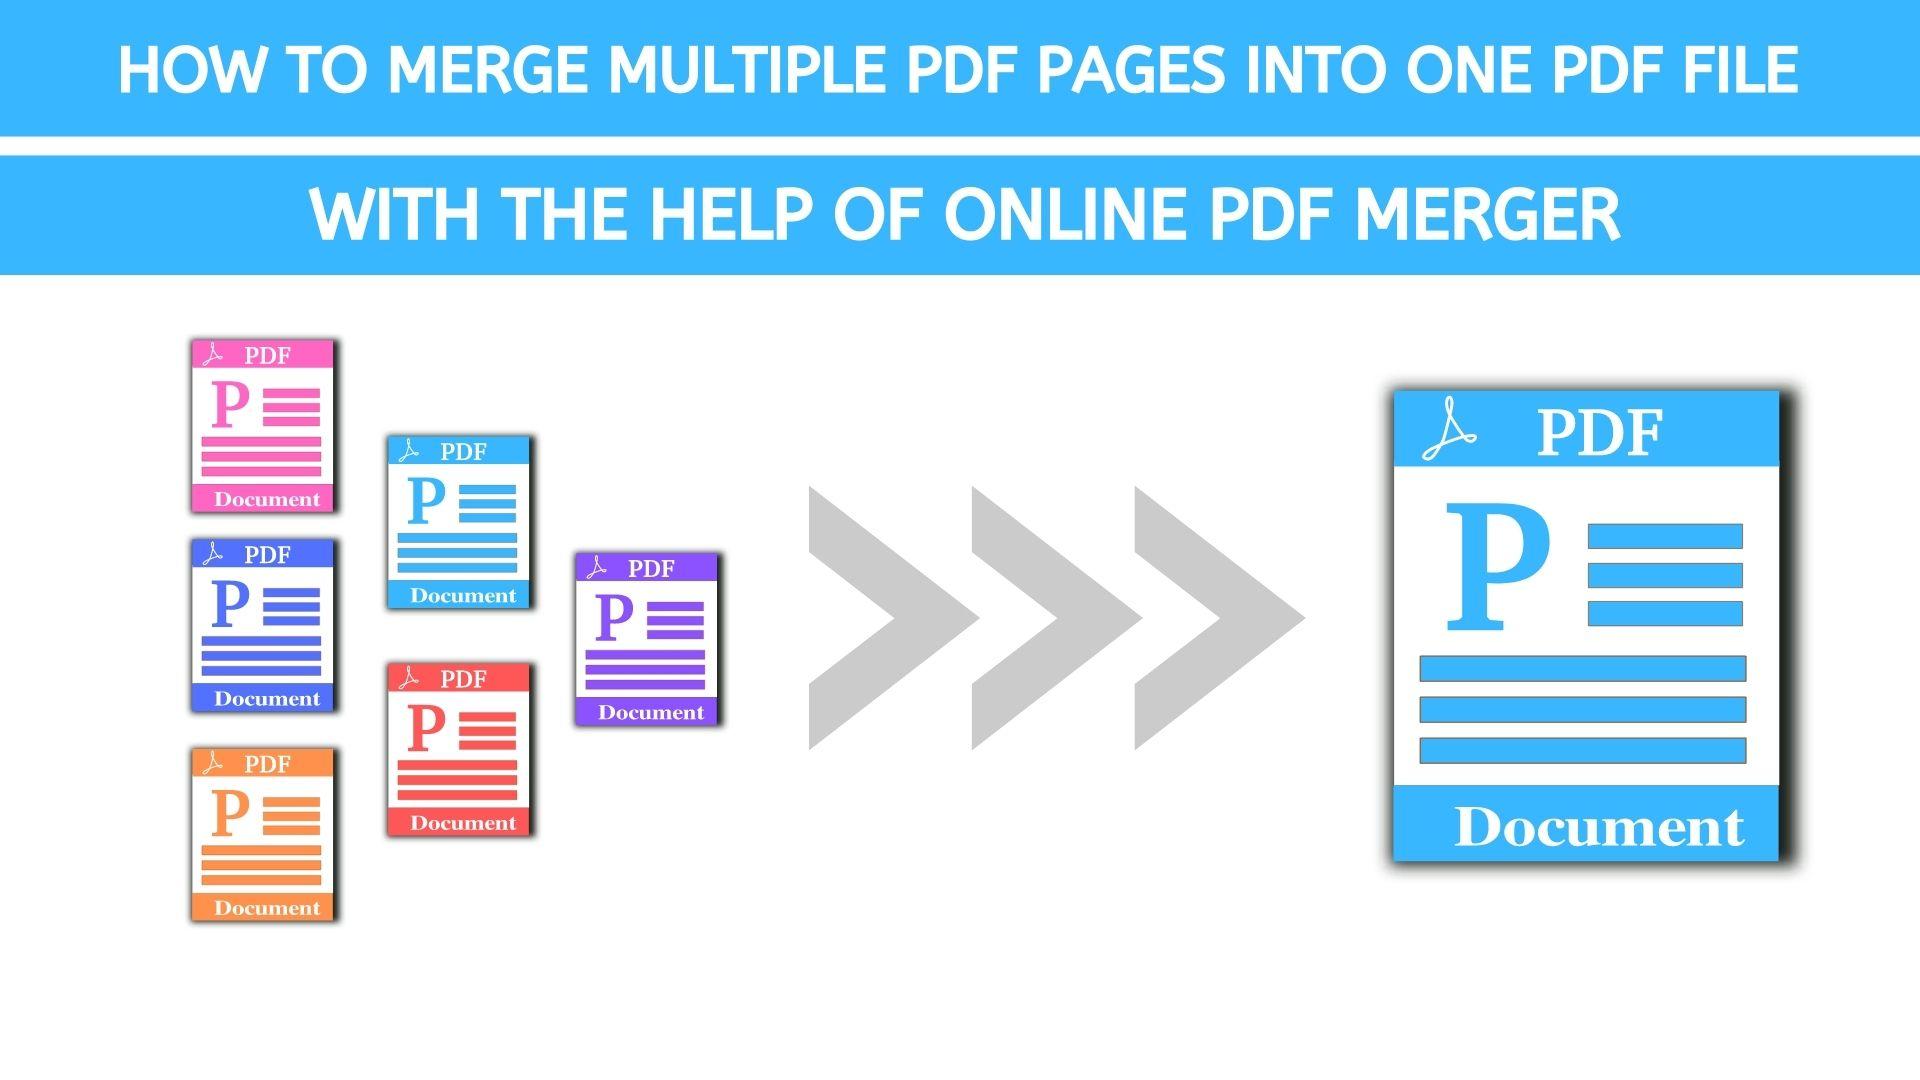 How to Merge Multiple PDF Pages into One PDF File with the Help of Online PDF Merger